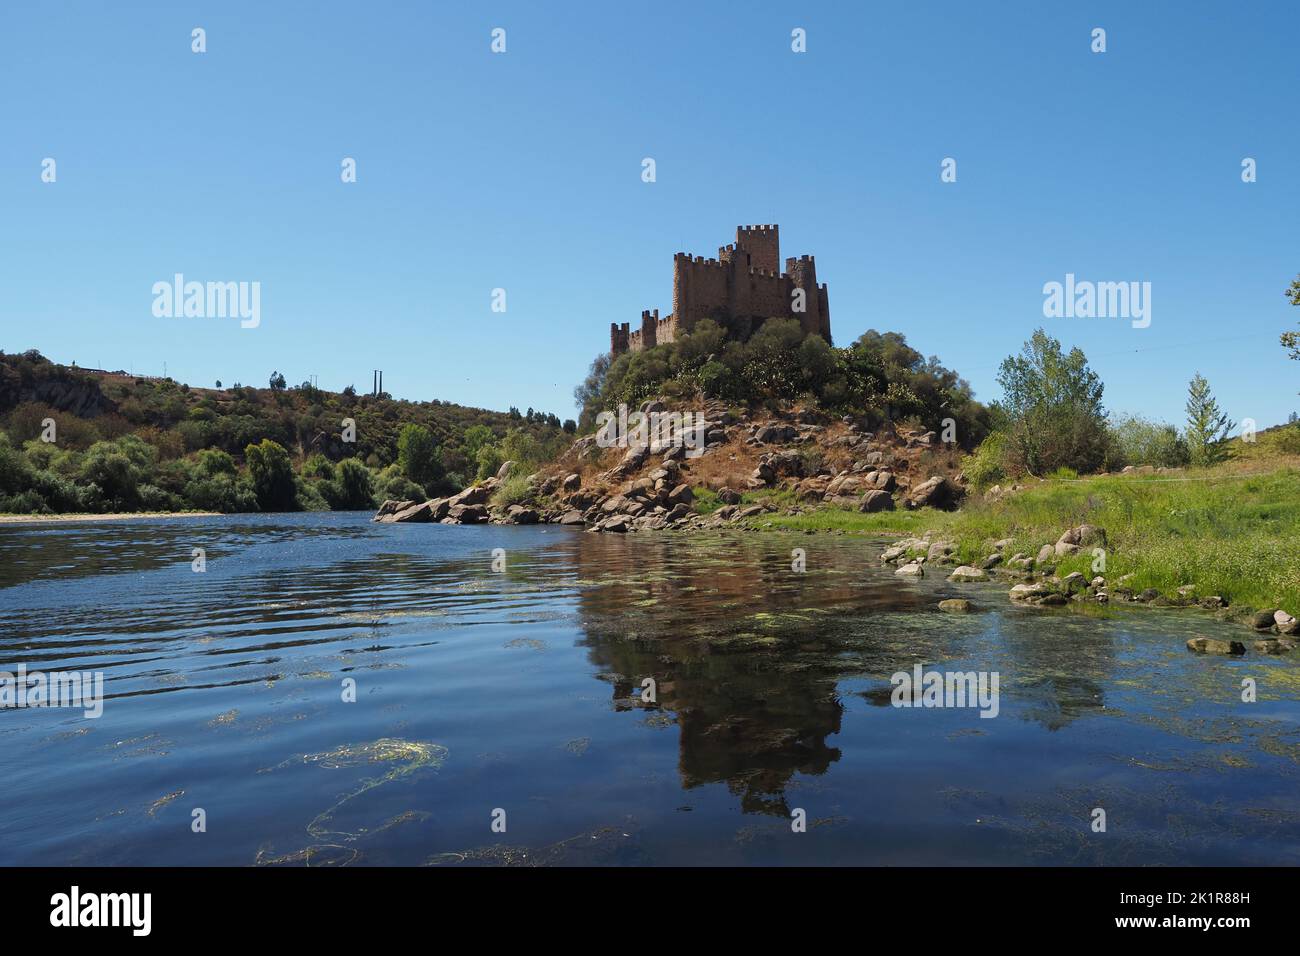 Remains of a Medieval castle of Almourol or Castelo de Almourol on a hill next to Tagus river in the Praia do Ribatejo, Portugal, Santarém district. Stock Photo